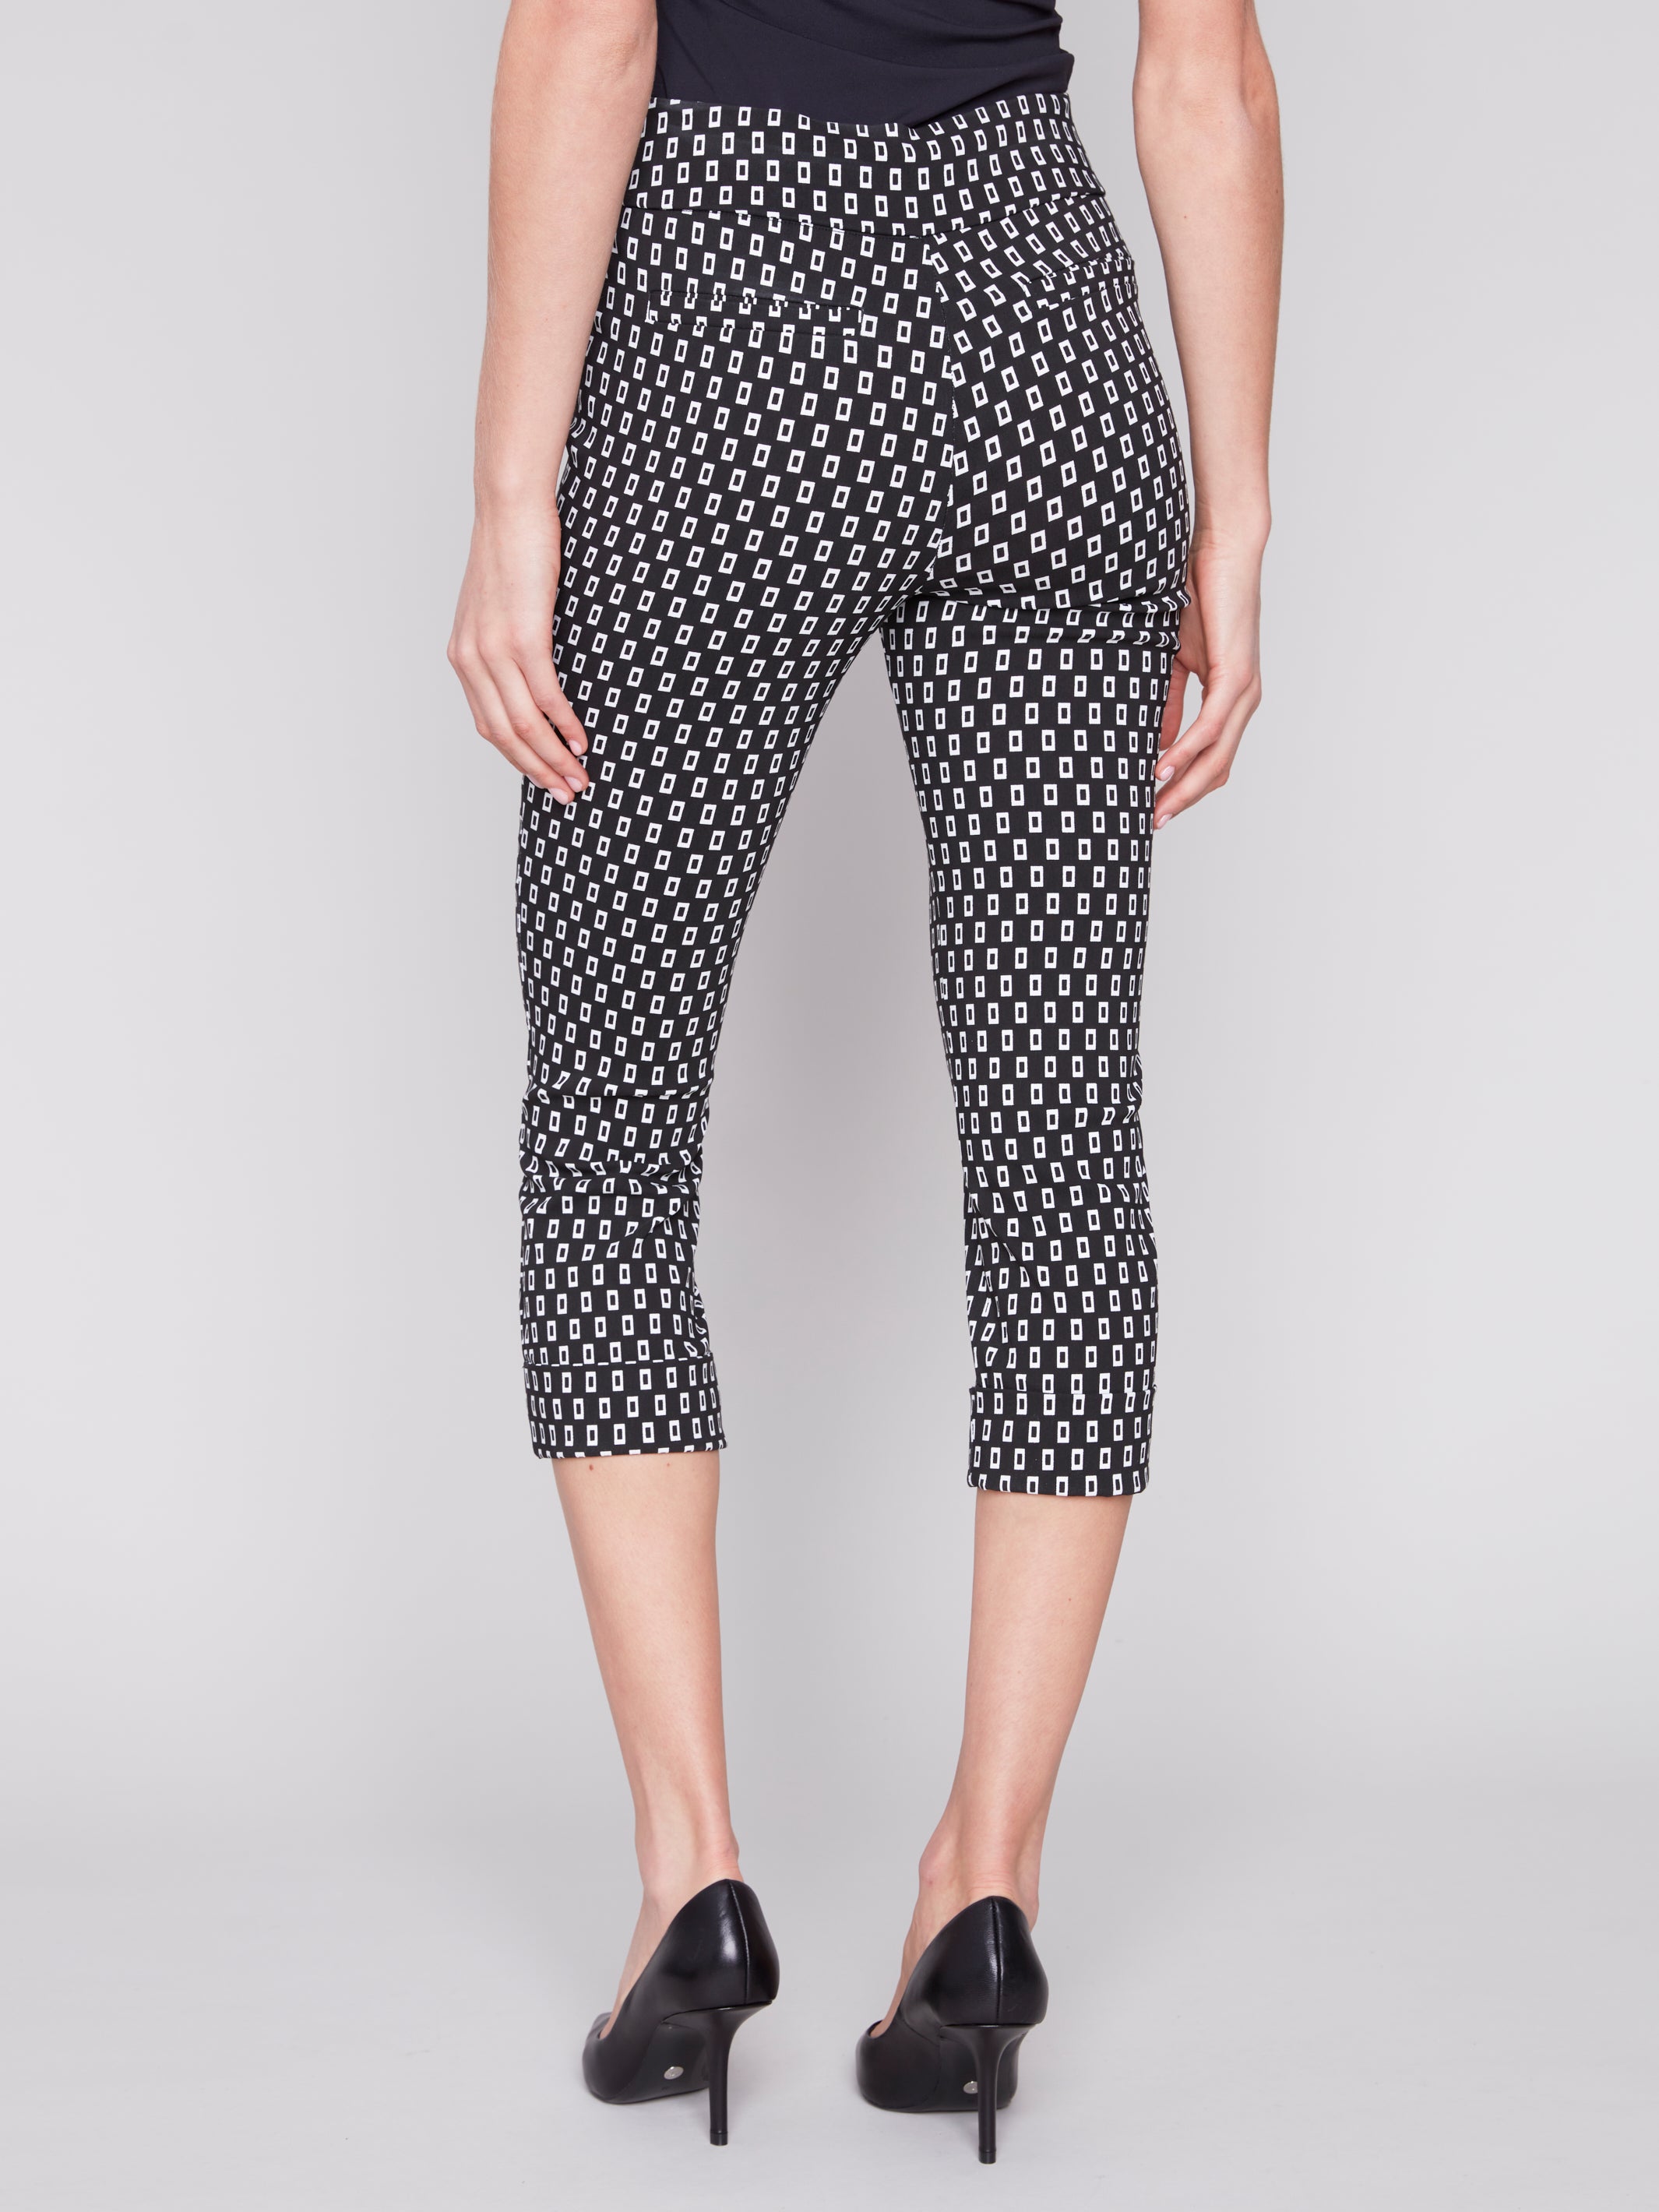 Pull On Cropped Cuffed Pants by Charlie B